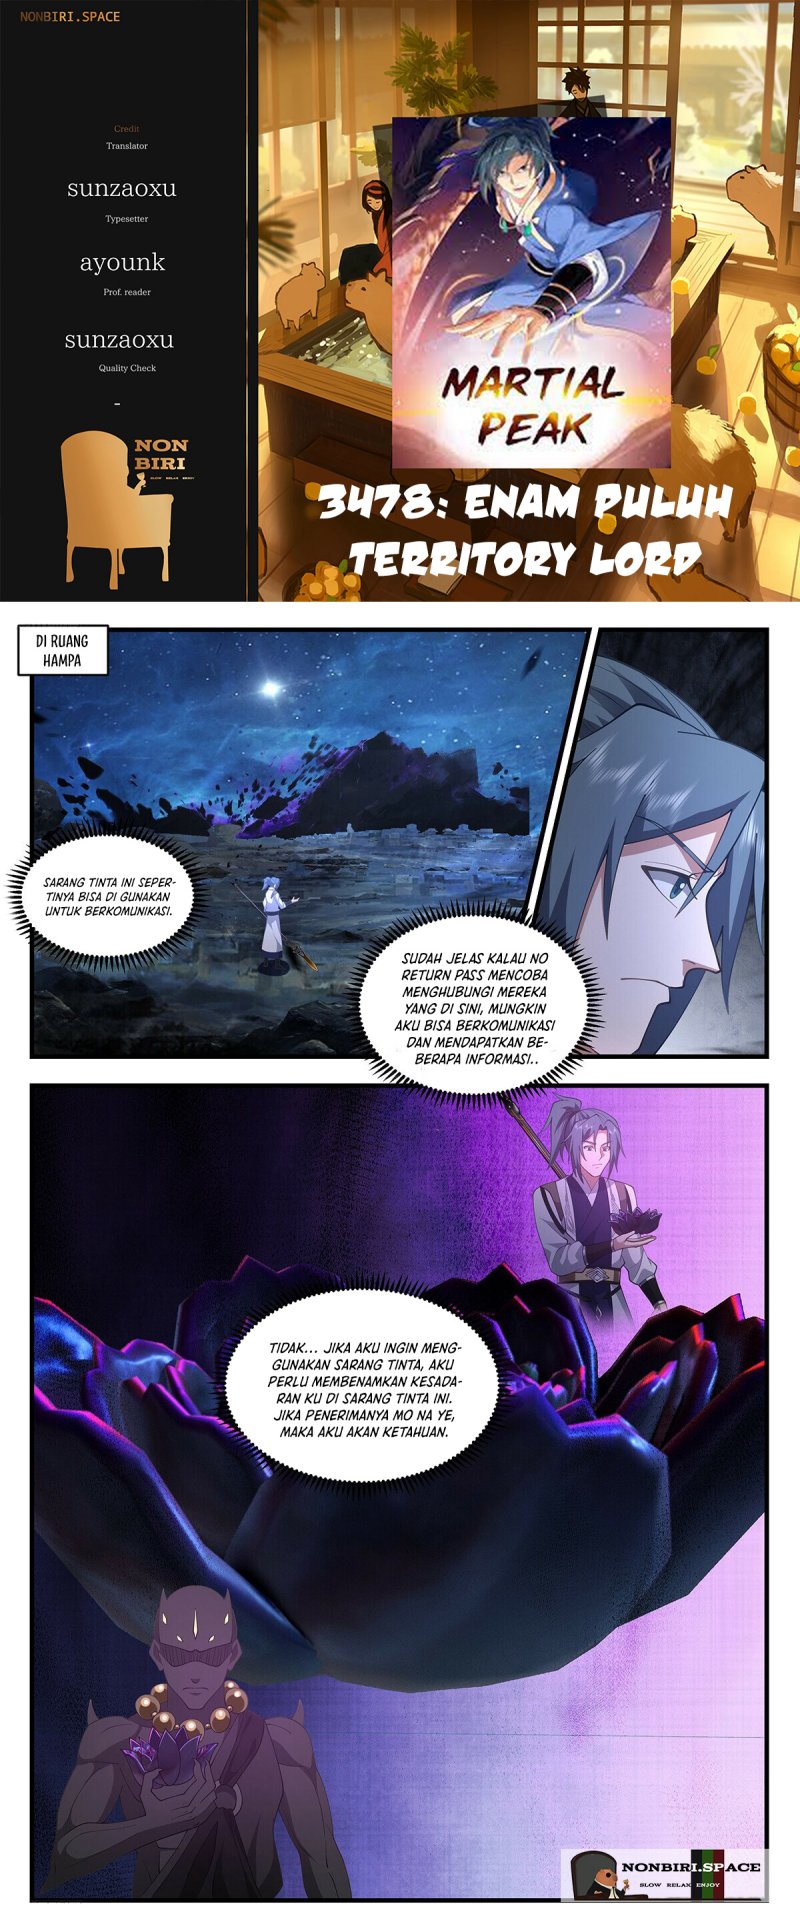 Martial Peak: Chapter 3479 - Page 1